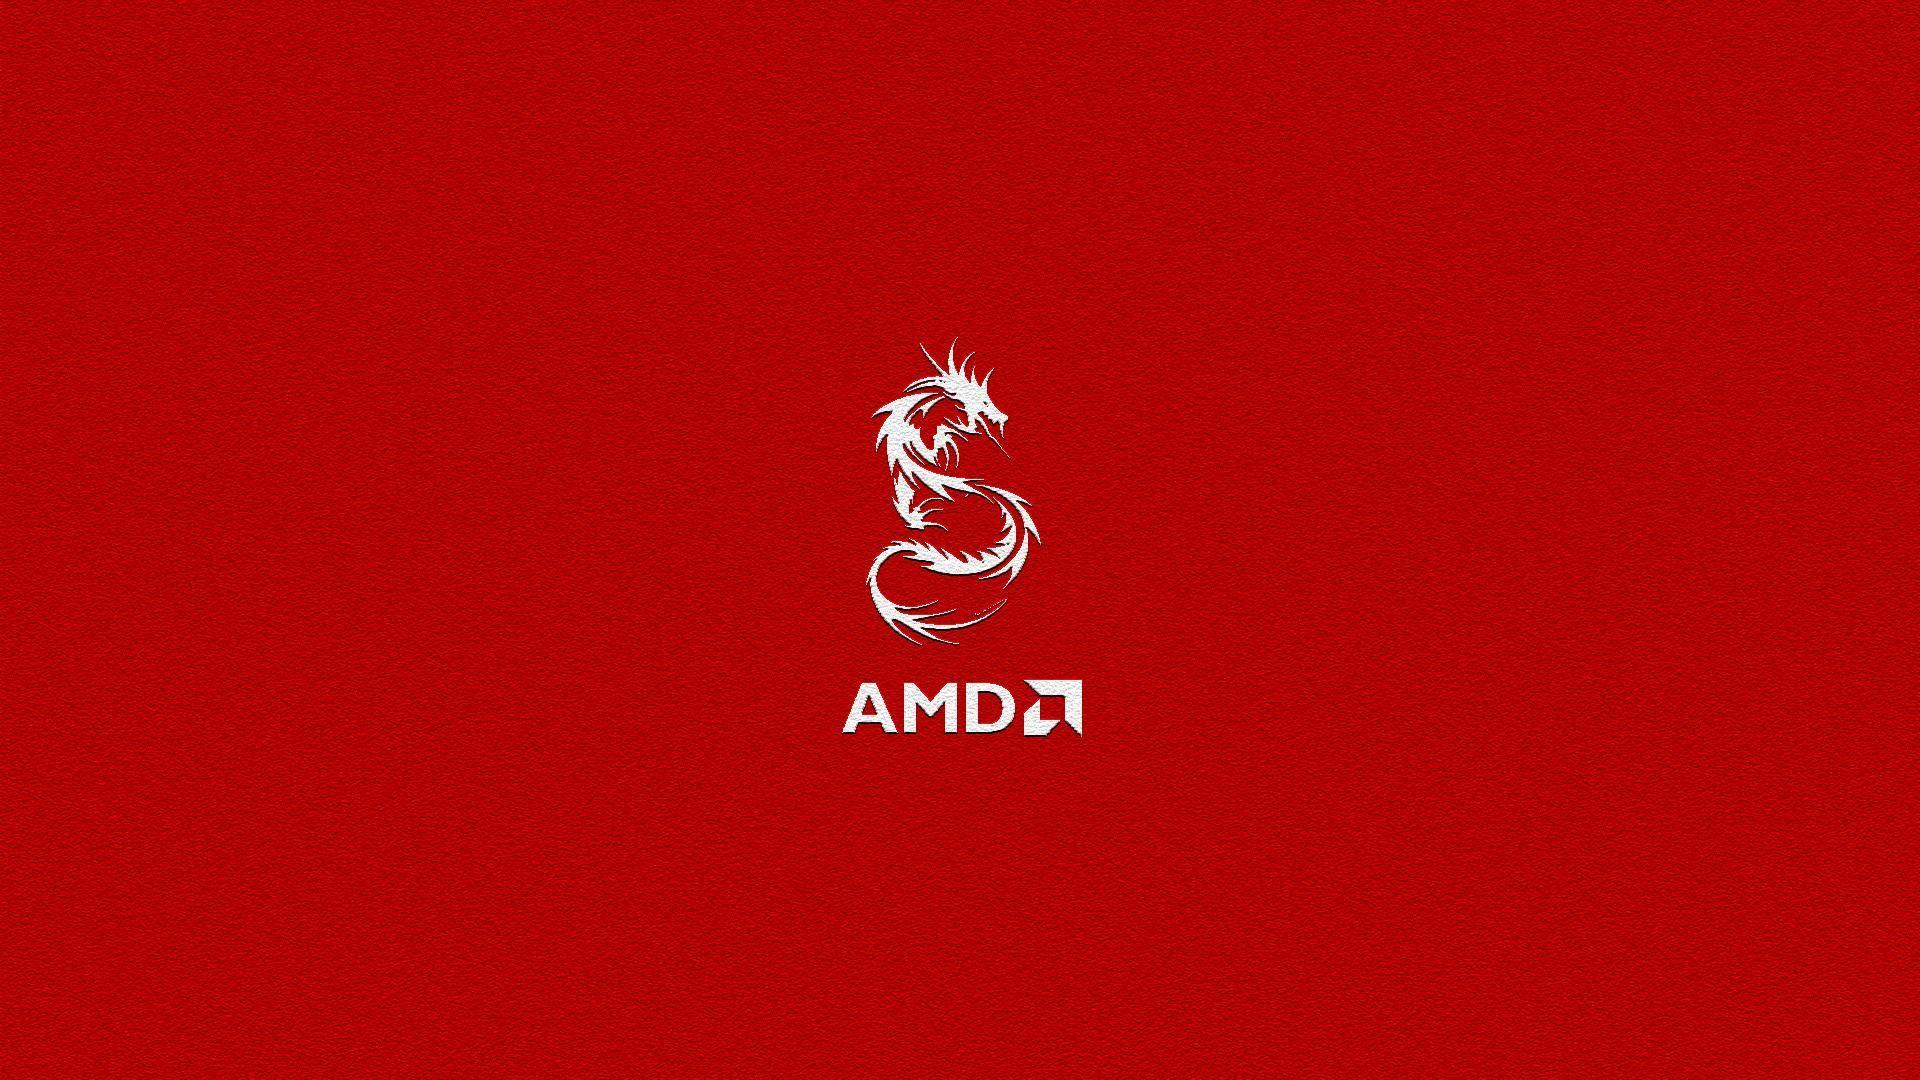 Amd Wallpapers Top Free Amd Backgrounds Wallpaperaccess